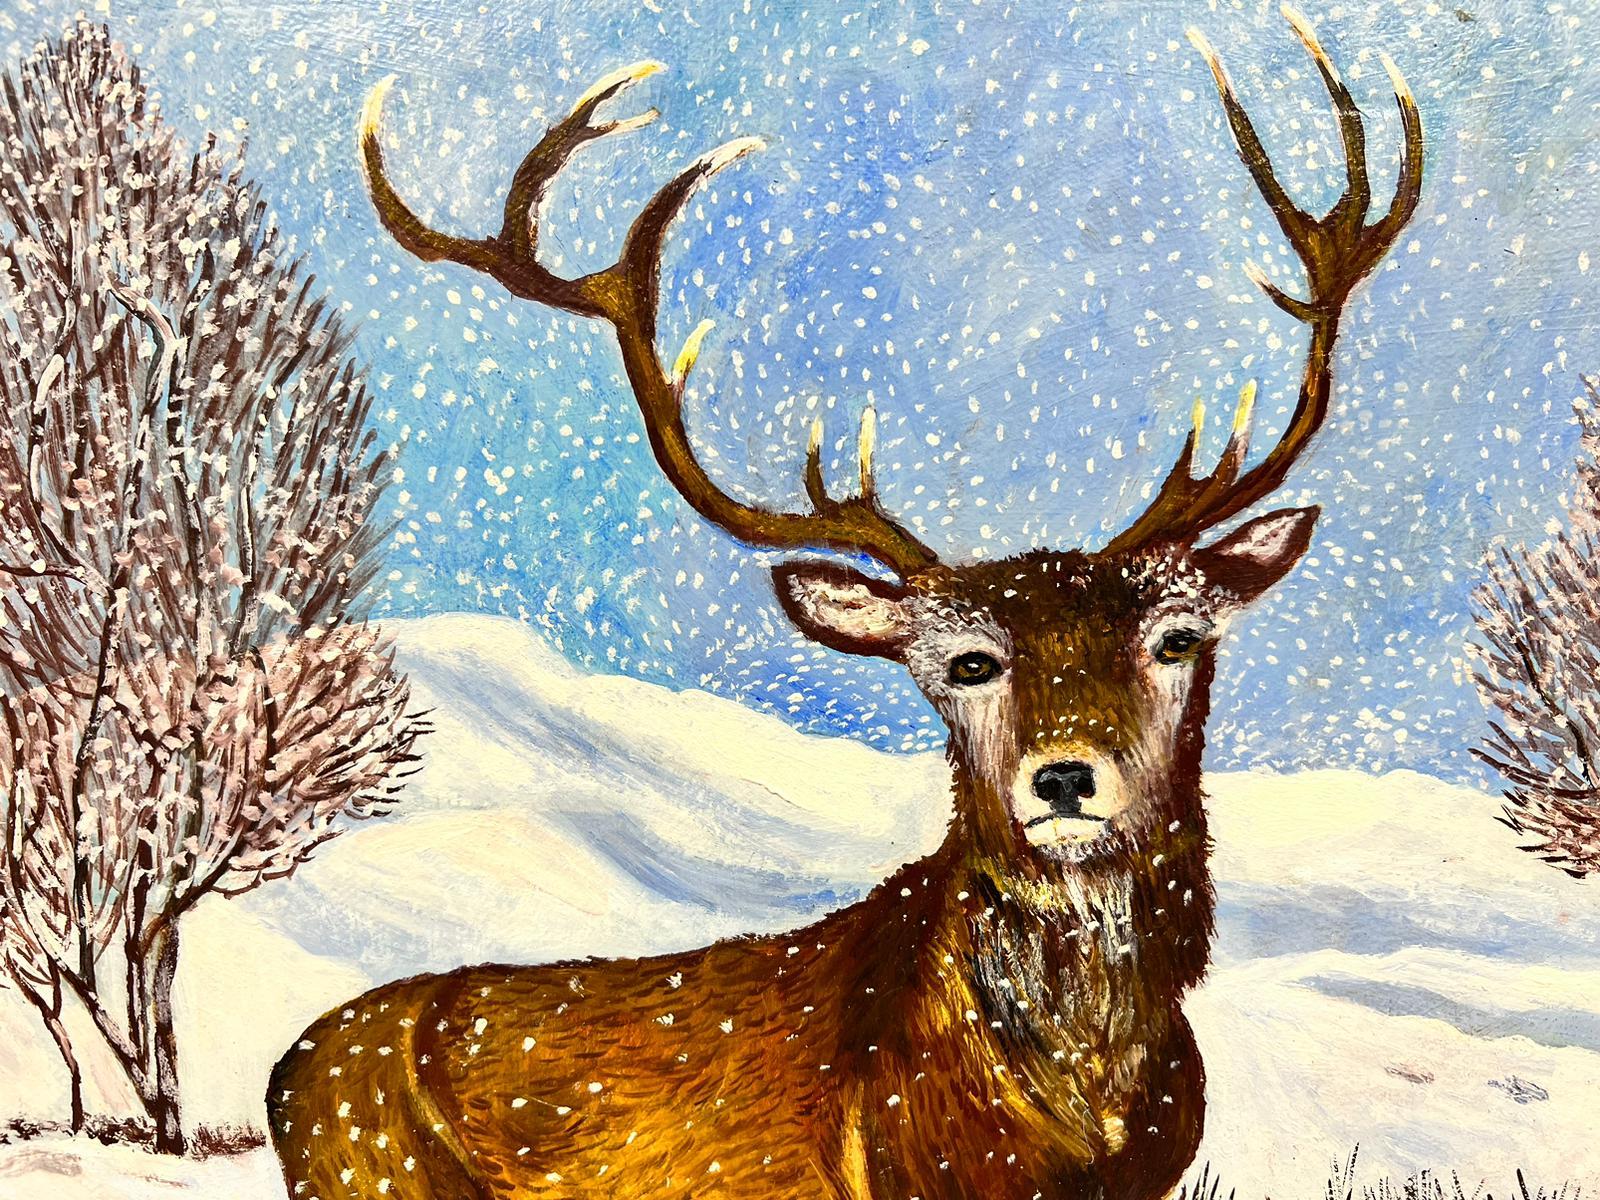 Stag In Snow
by Ben George Powell, British contemporary artist
signed 
acrylic on canvas, unframed
canvas: 12 x 16 inches
provenance: private collection of this artists work, UK
The painting is in very good and presentable condition.
